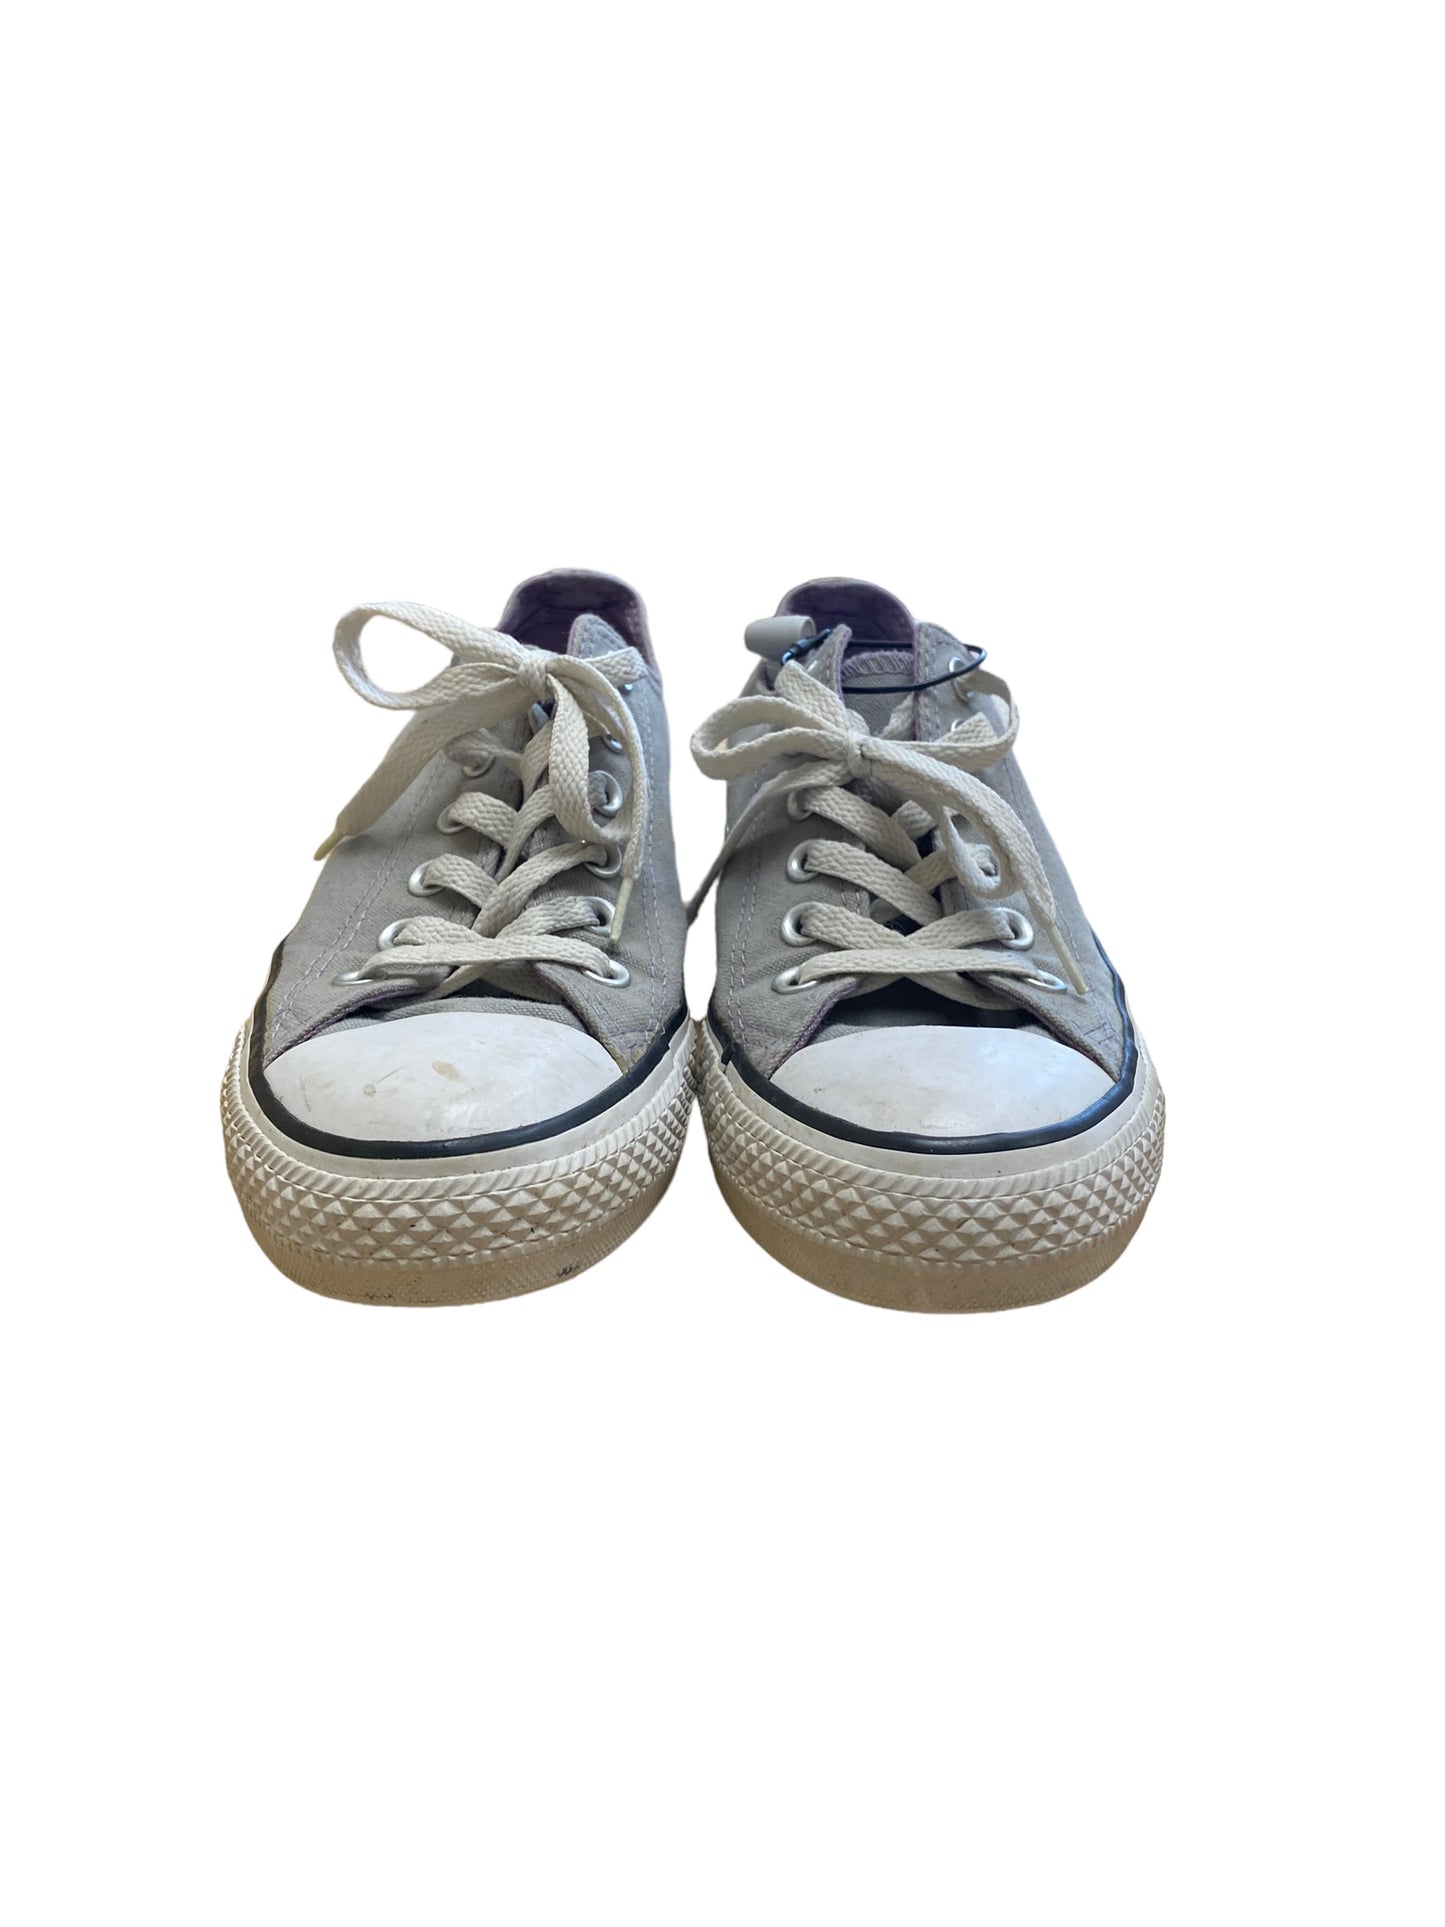 Shoes Flats By Converse  Size: 8